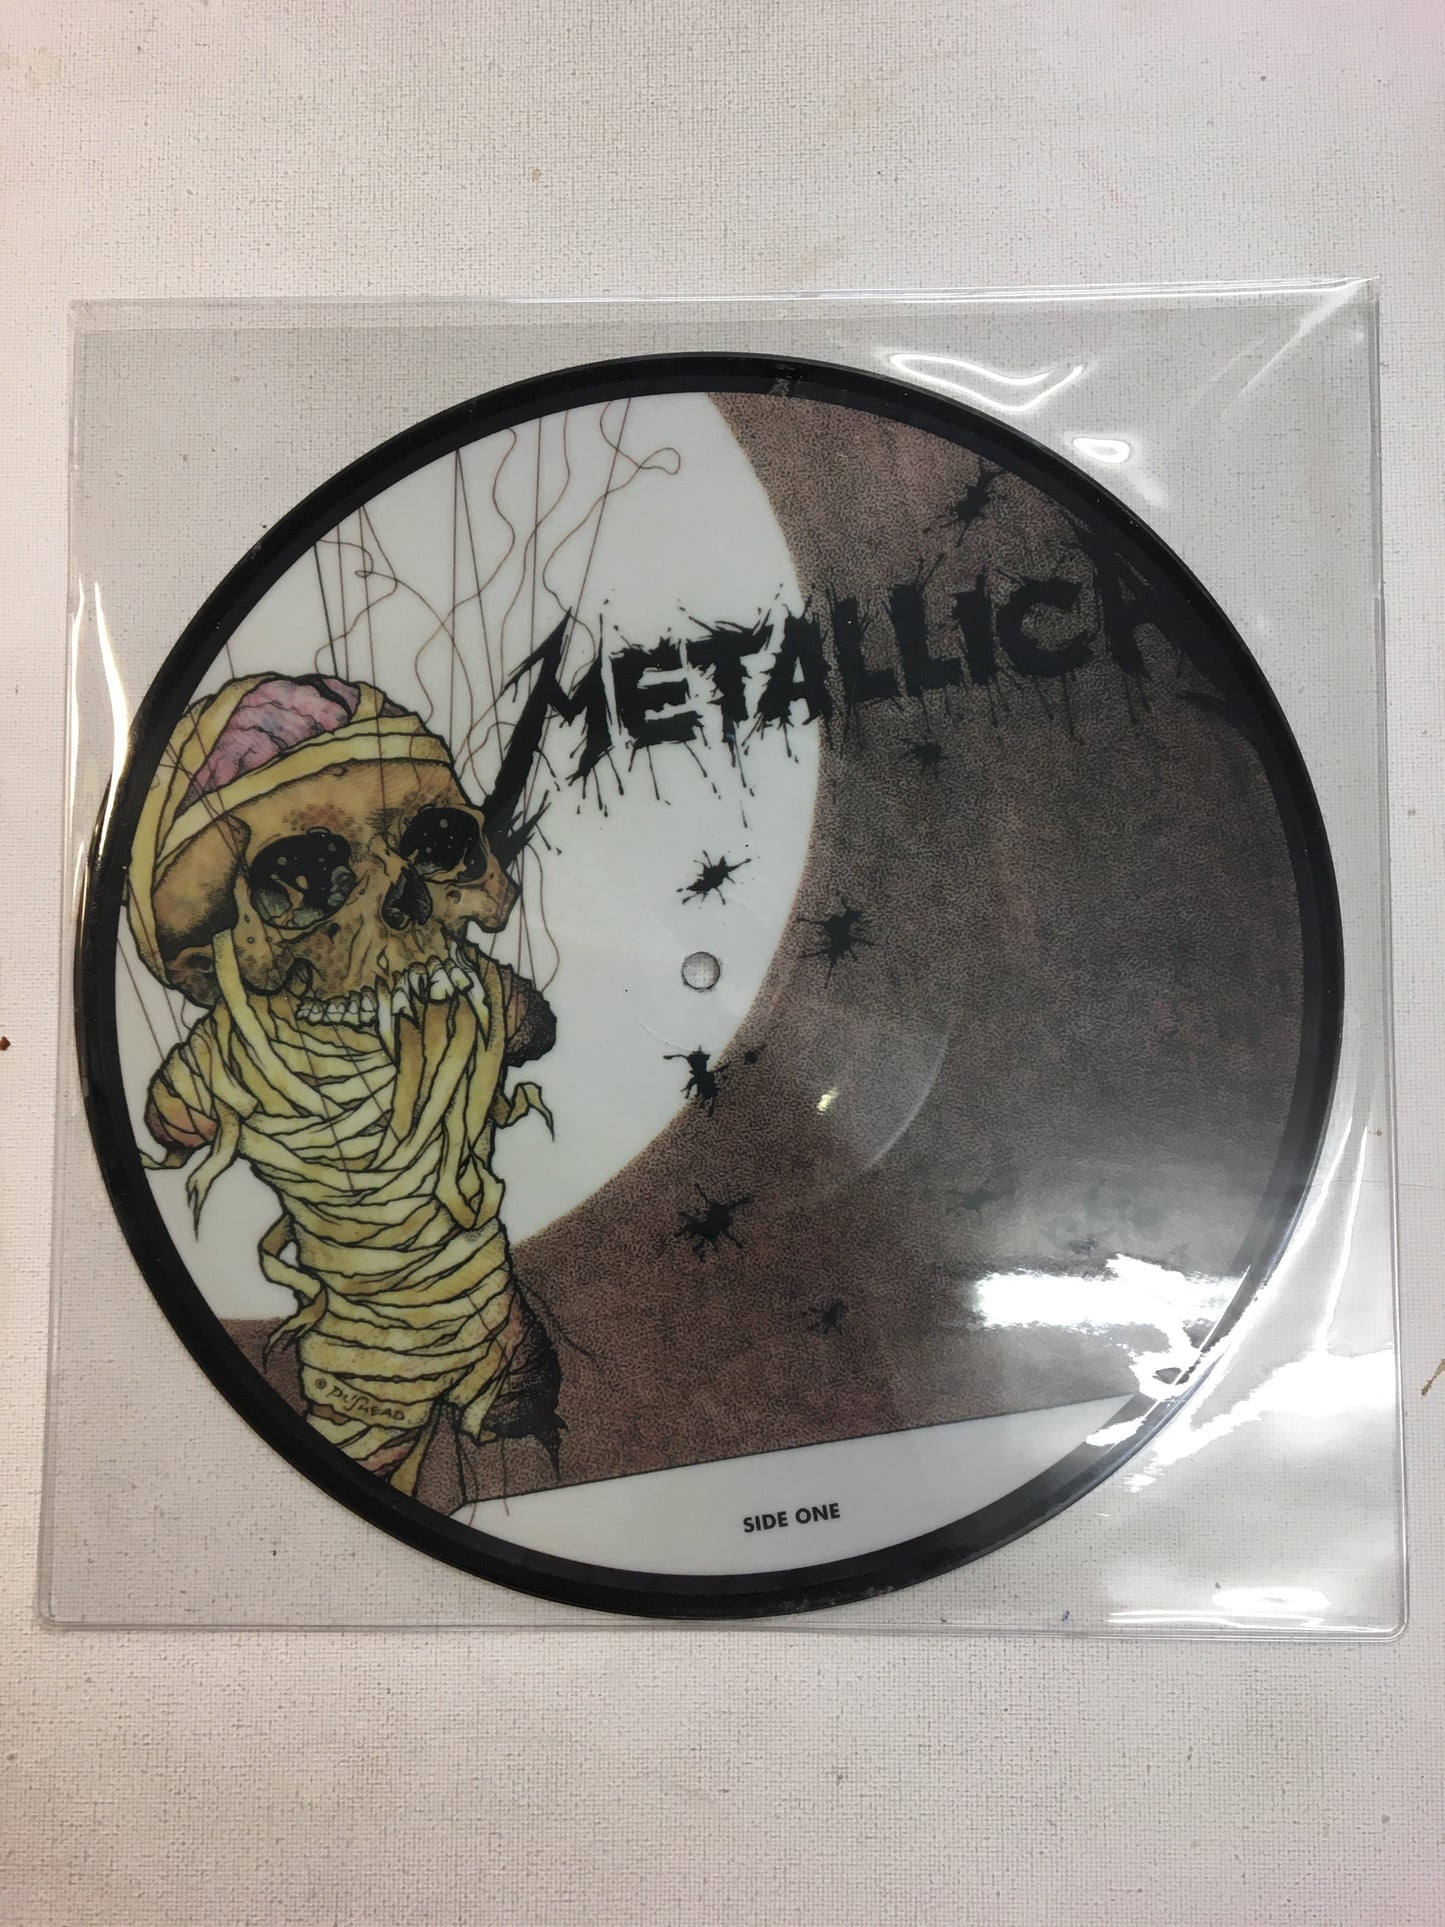 METALLICA 10” PICTURE DISC ; ONE